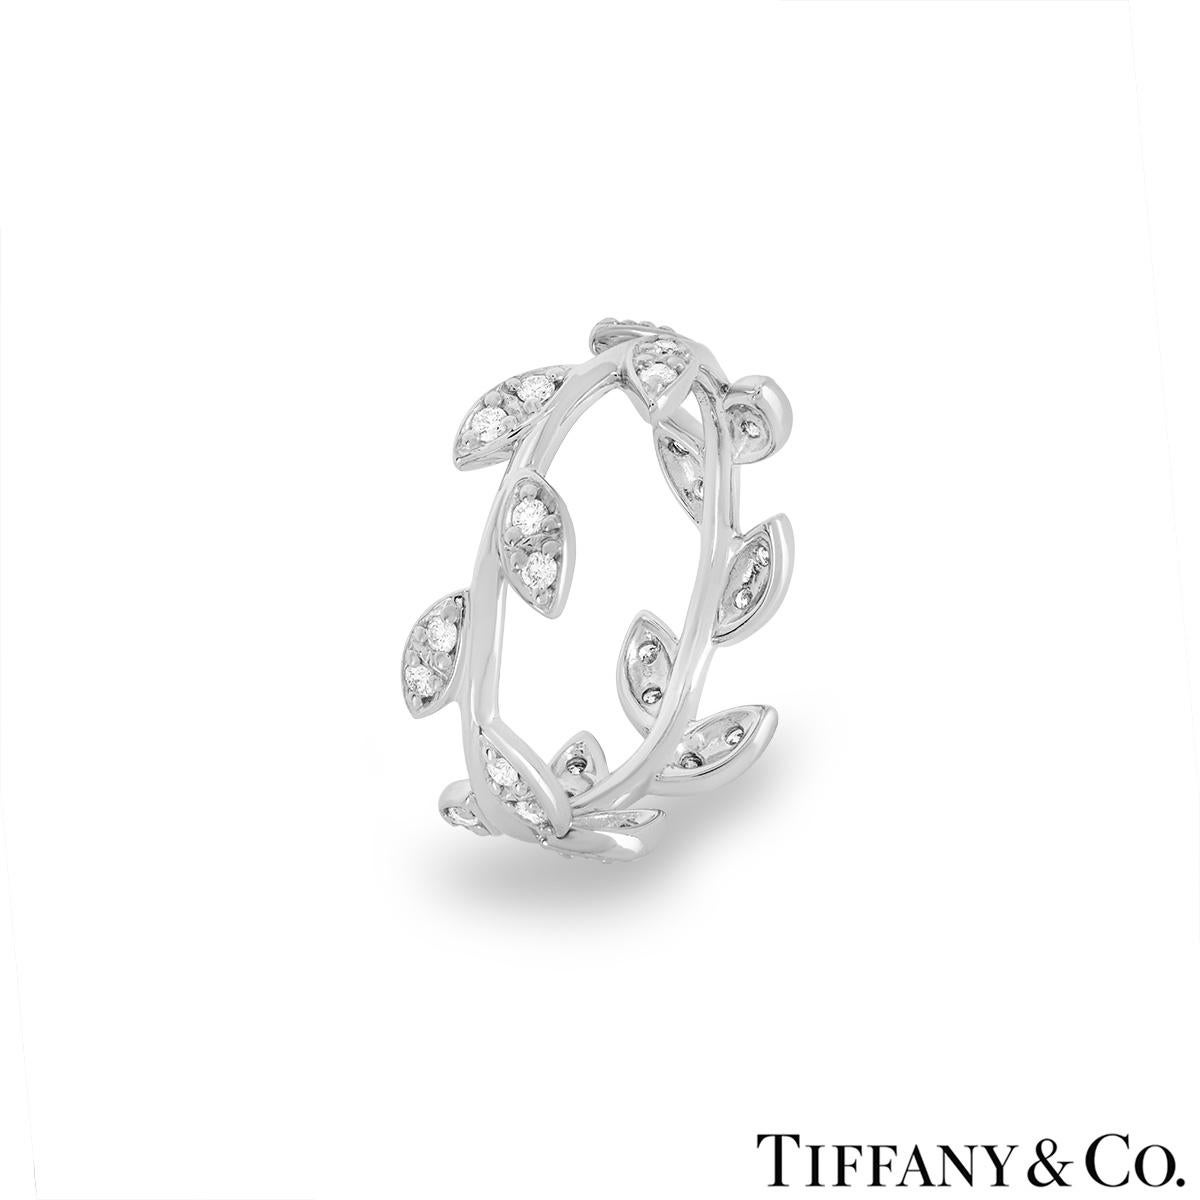 A delicate 18k white gold diamond ring by Tiffany & Co. from Paloma Picasso's Olive Leaf collection. The ring features a leaf design wrapped around a stem and pave set with 28 round brilliant cut diamonds totalling approximately 0.28ct, E-F colour